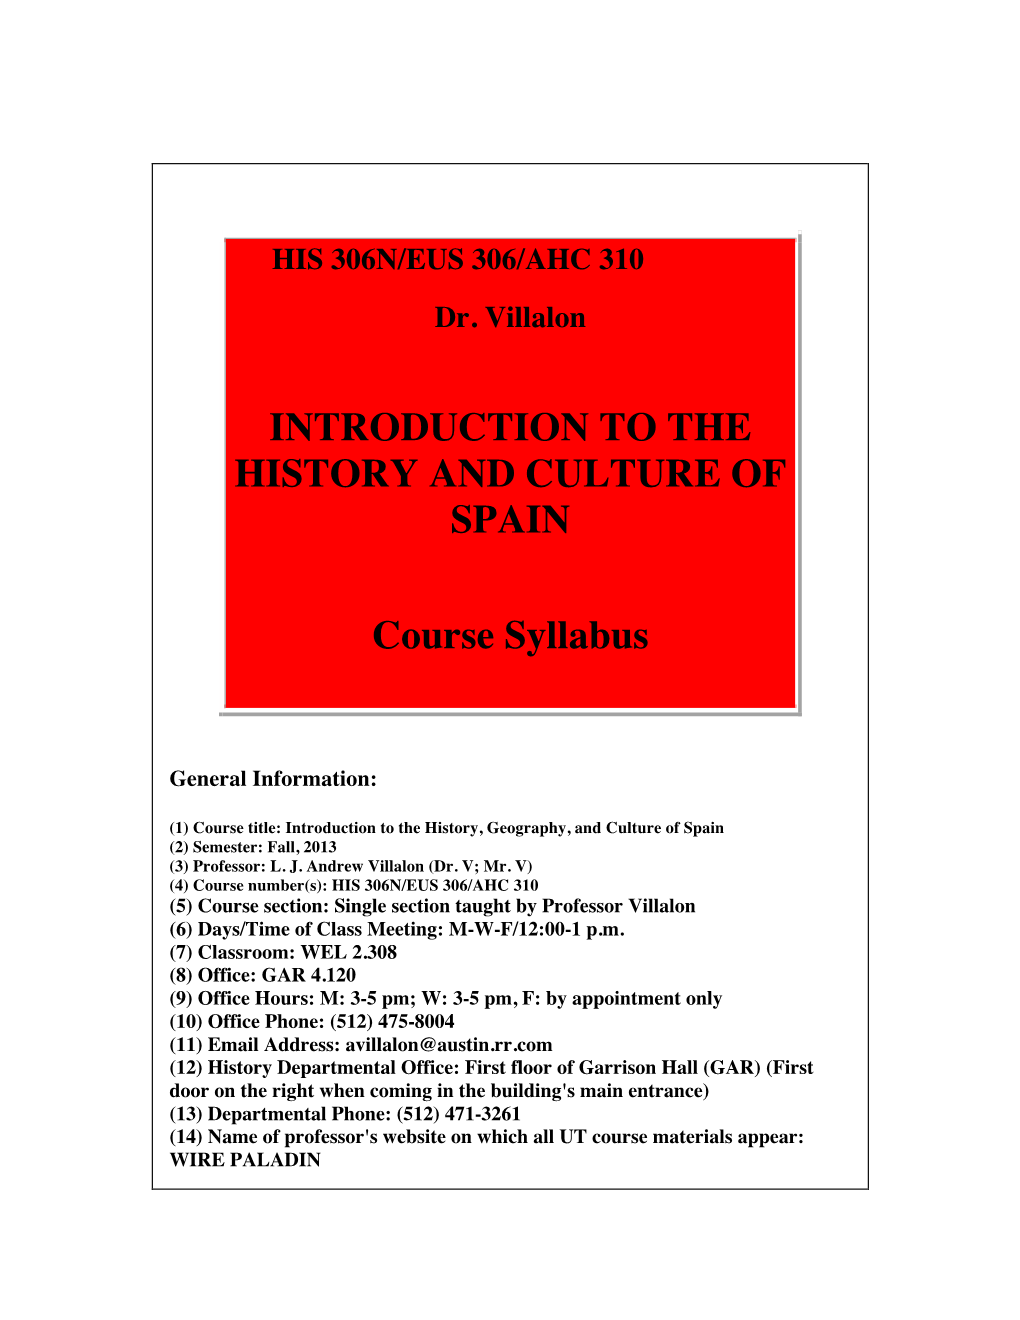 INTRODUCTION to the HISTORY and CULTURE of SPAIN Course